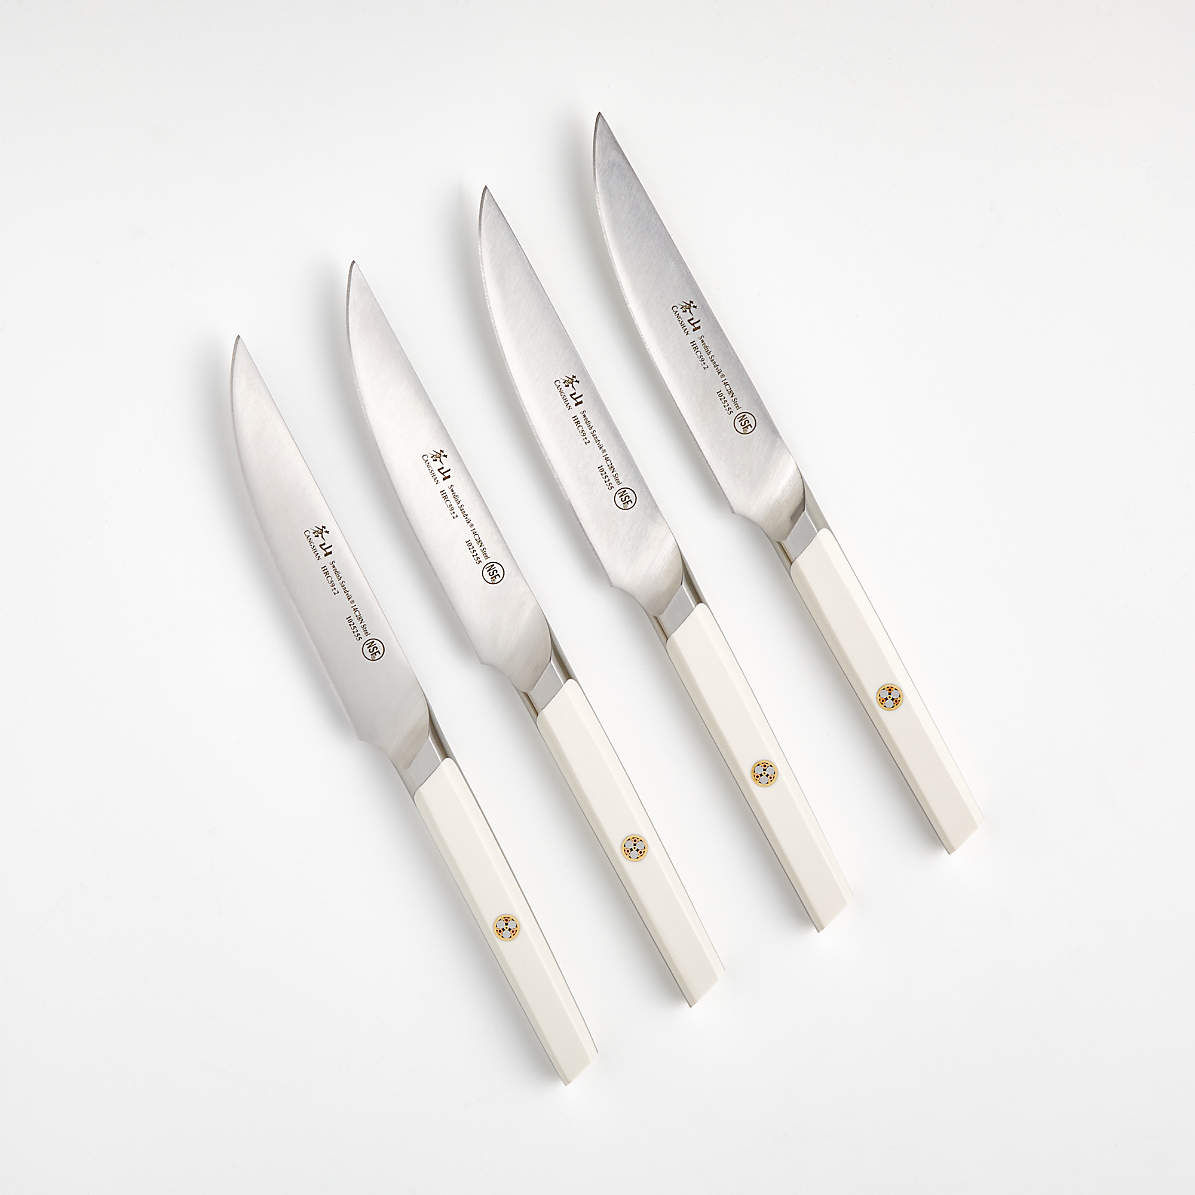 Cangshan Stainless Steel Steak Knives, Set of 8 + Reviews